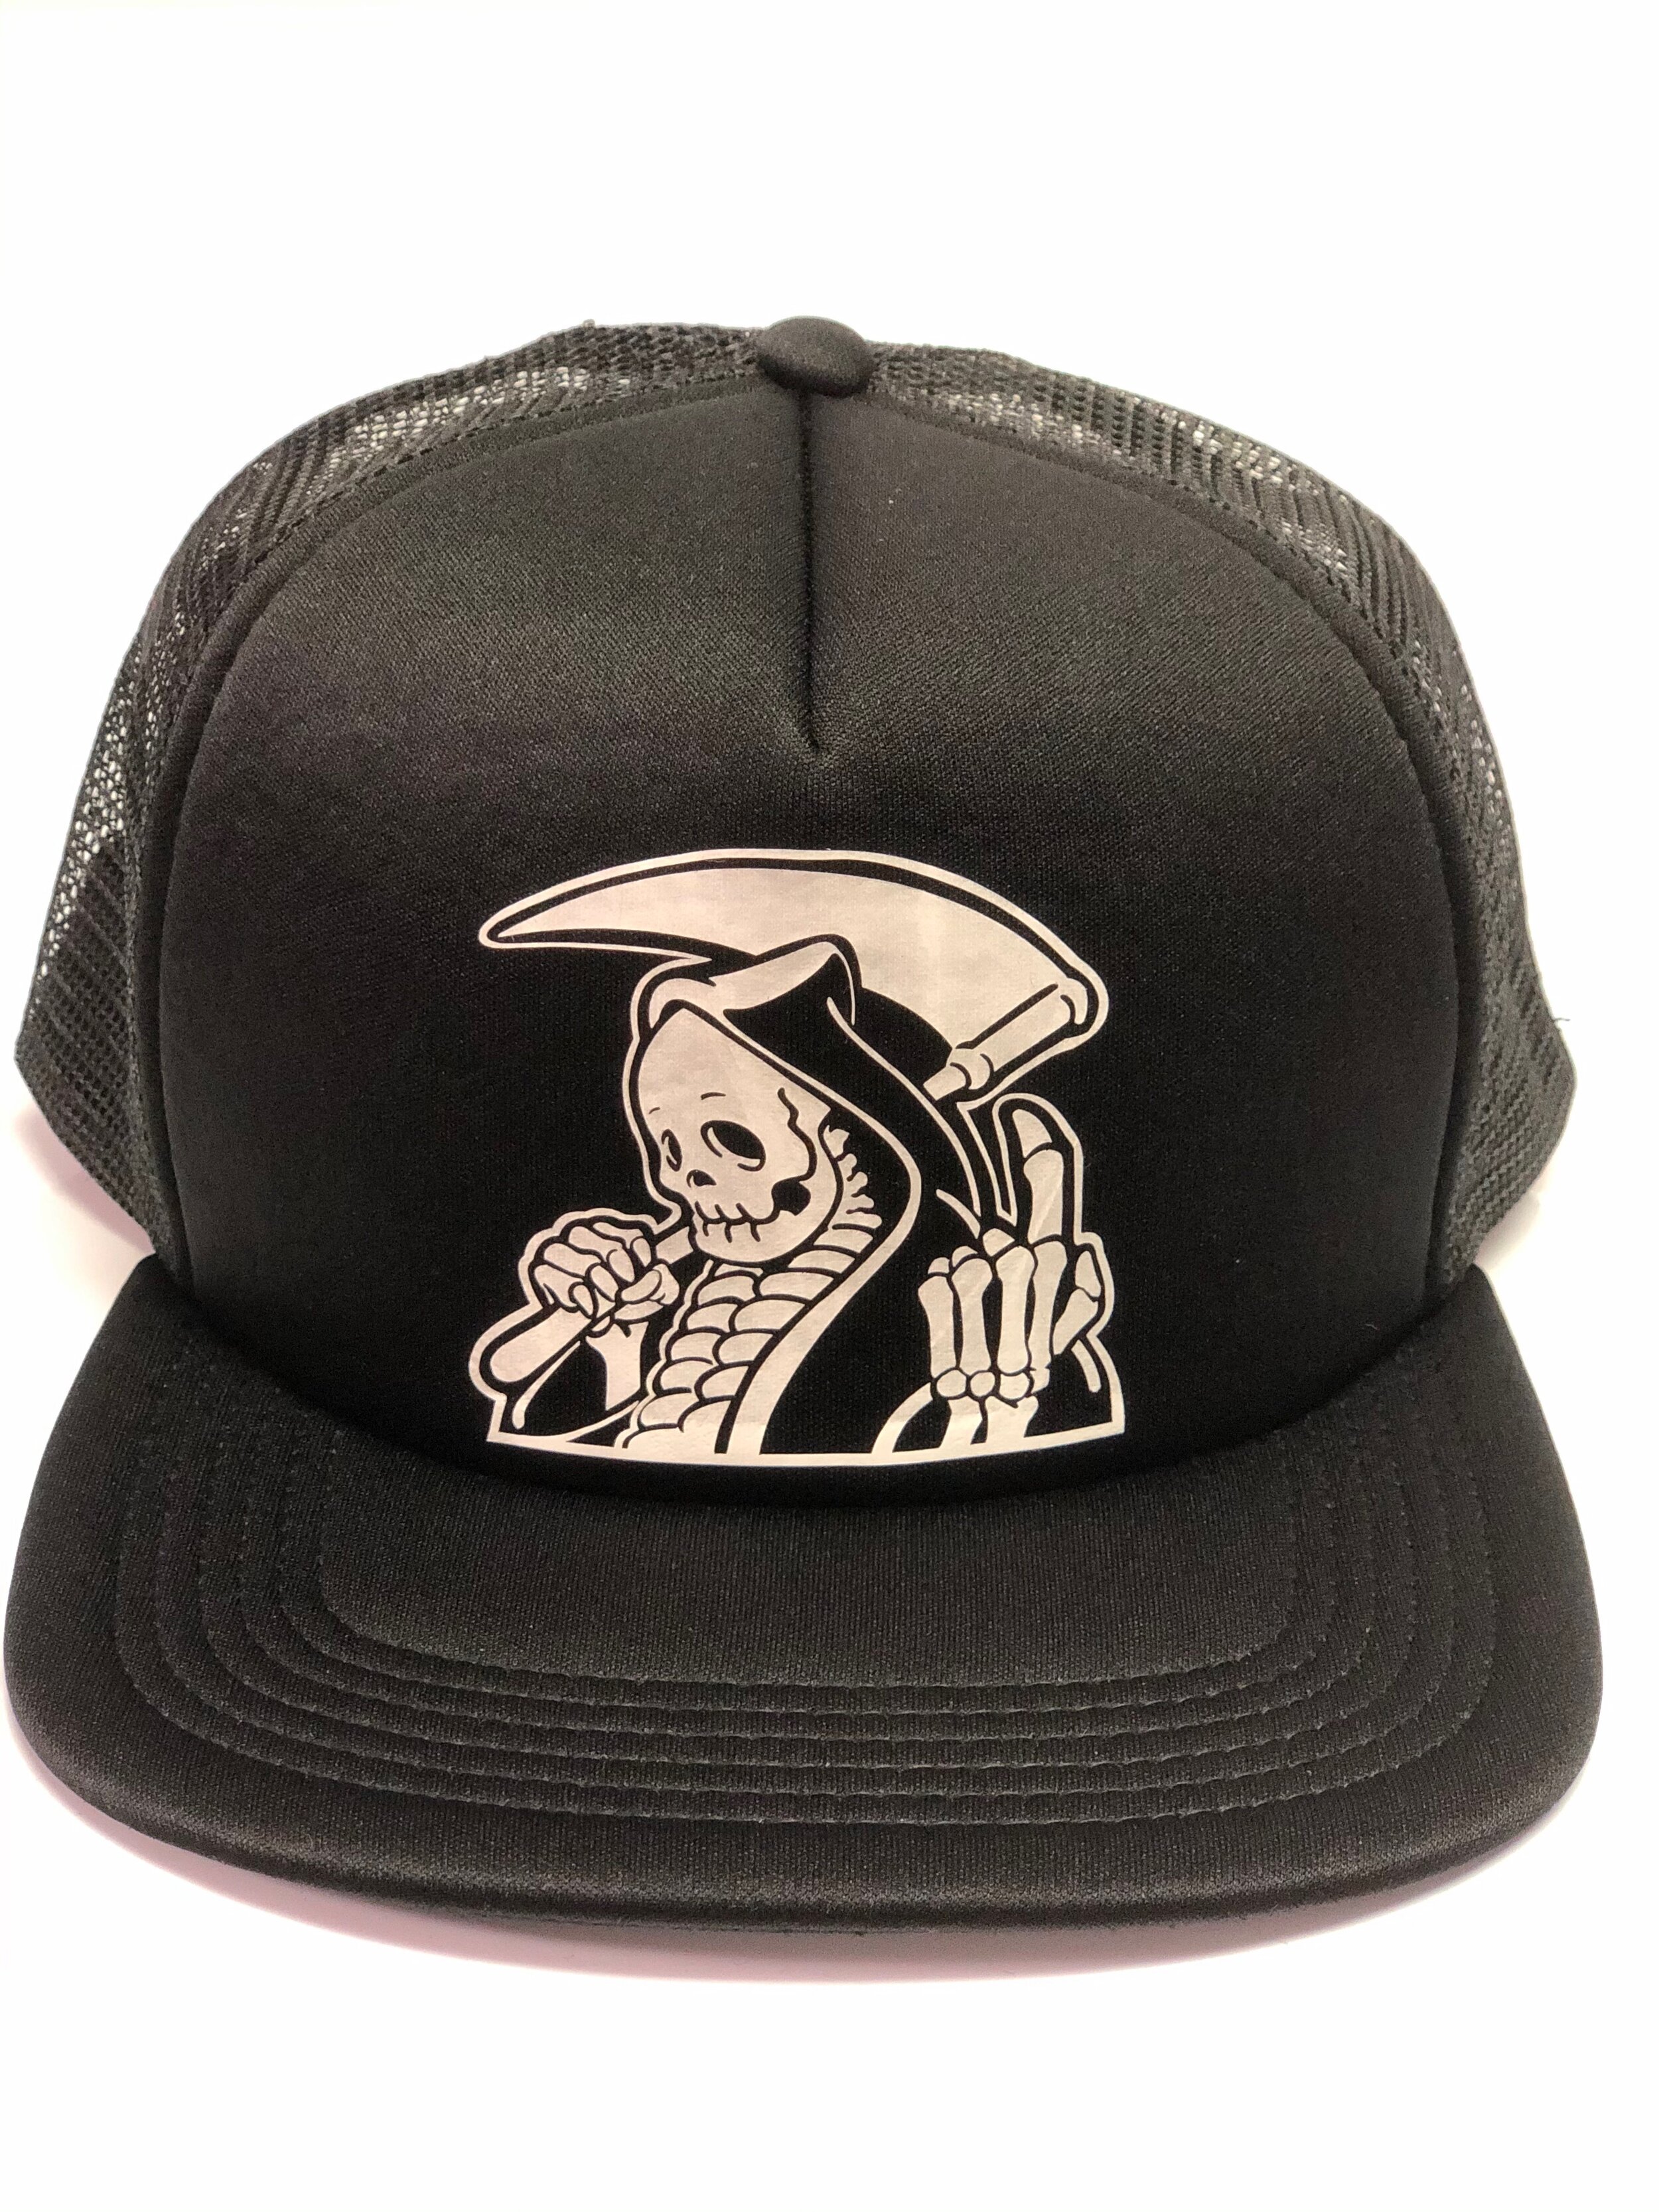 Back From The Grave Embroidered Snapback Hat NEW Authentic OVERWATCH Reaper 